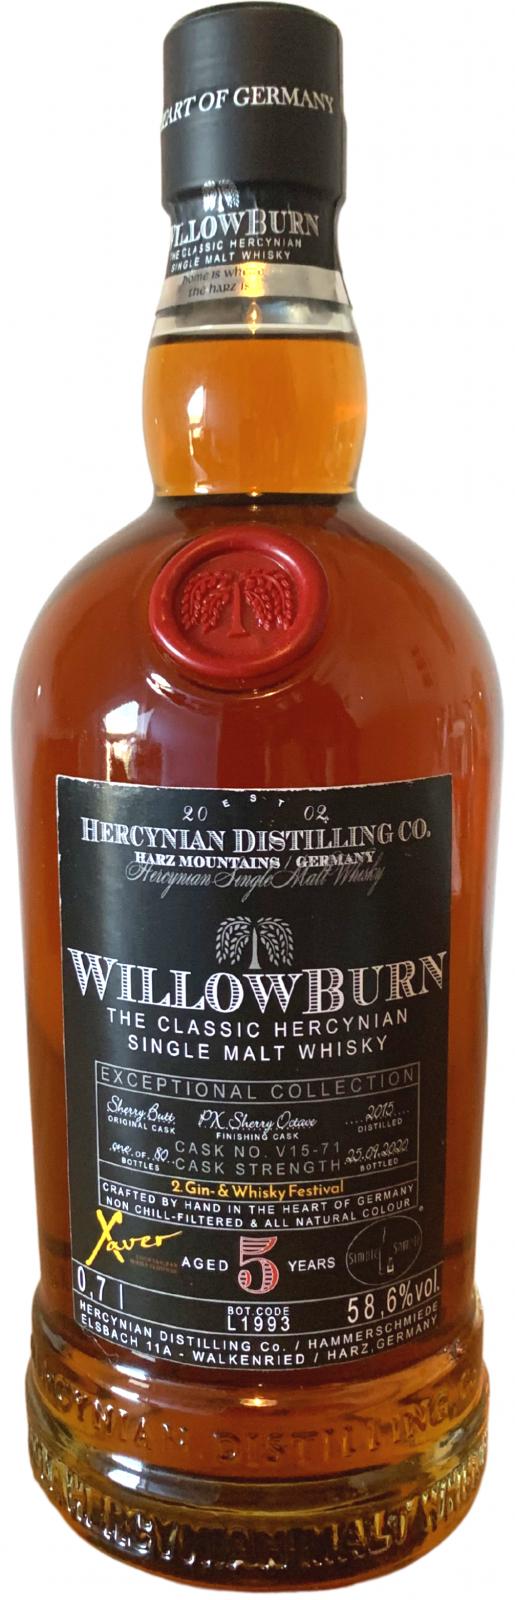 WillowBurn 2015 Exceptional Collection V15-71 Xaver Lounge & Simple Sample 58.6% 700ml